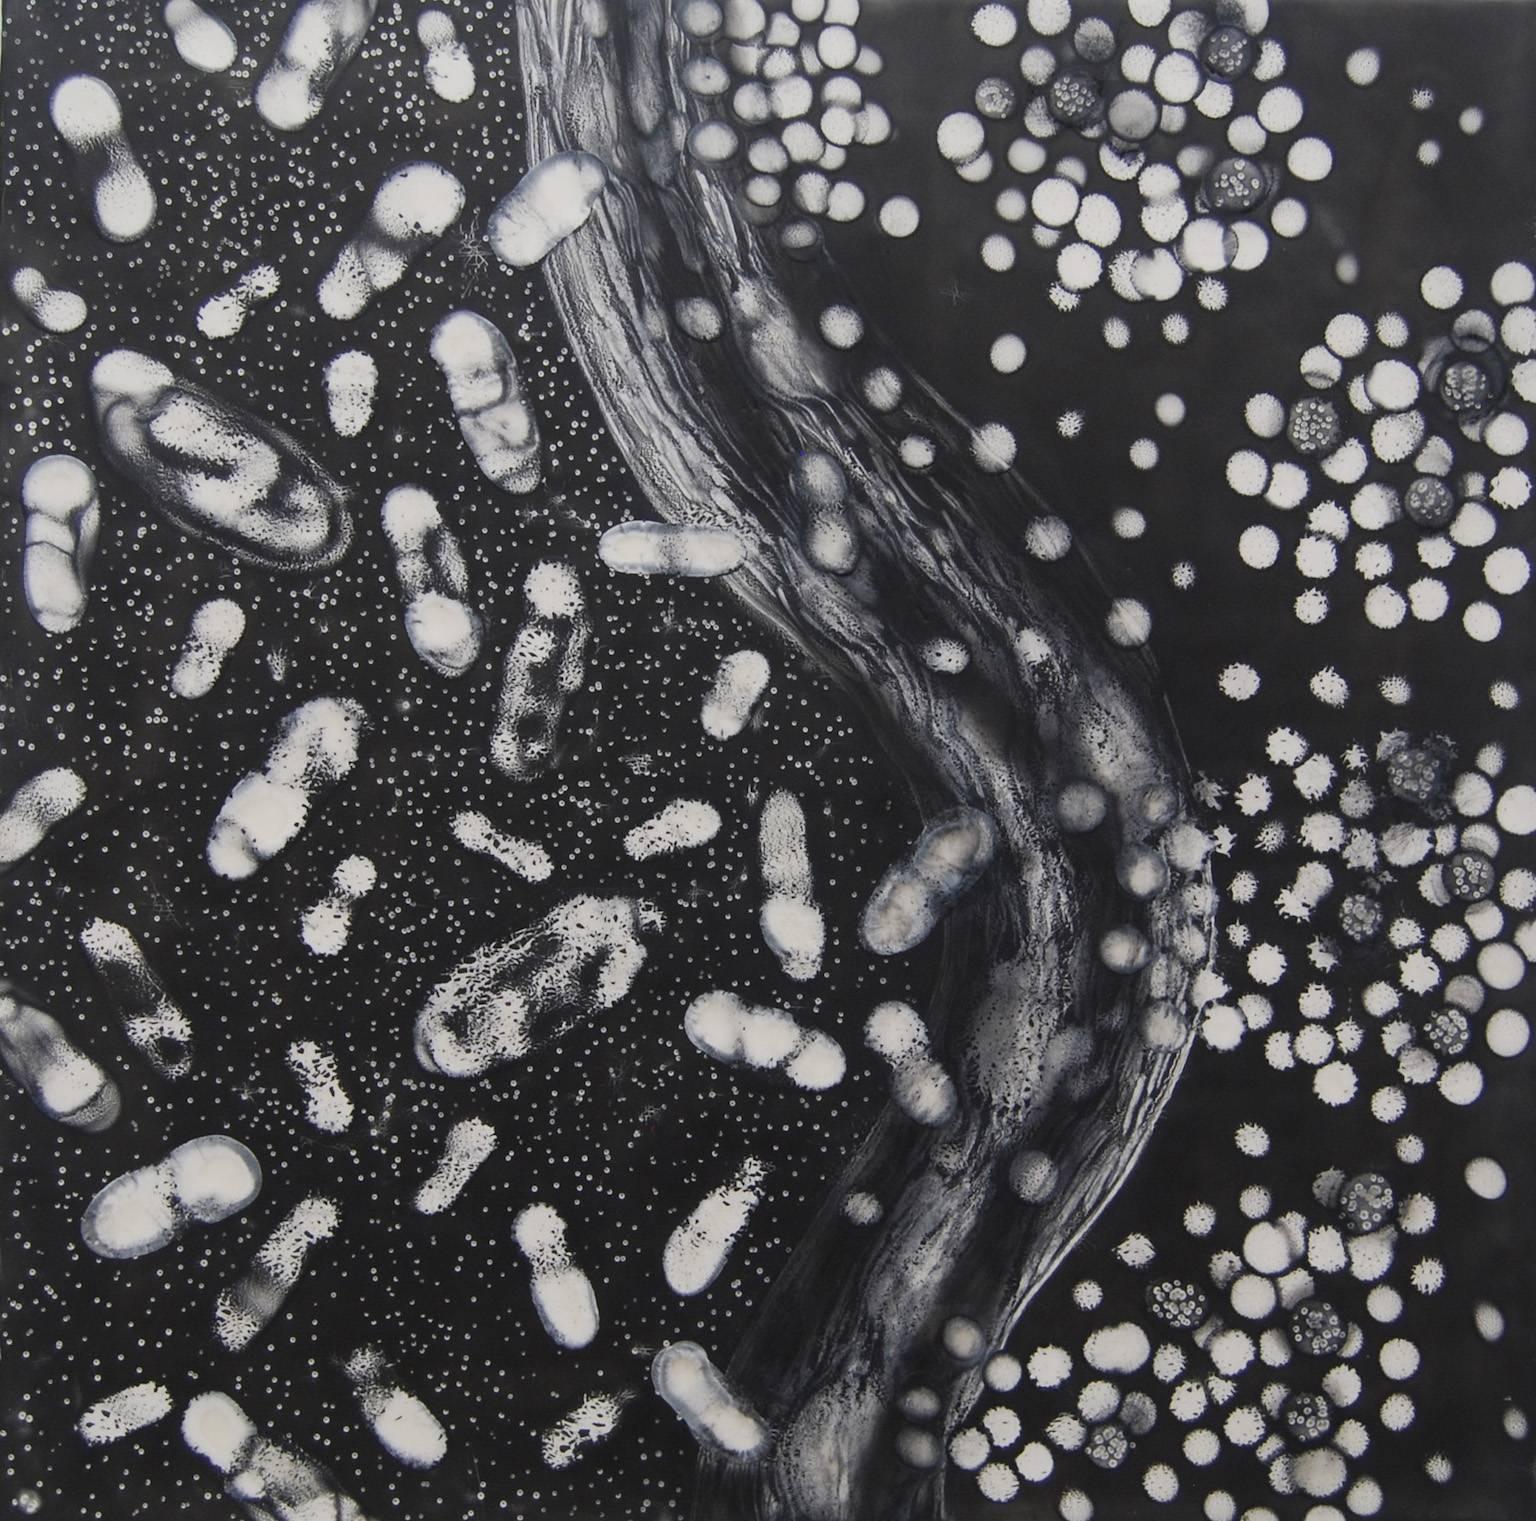 "Cells Alive 4", abstract, migration, black, white, graphite, encaustic painting - Painting by Kay Hartung